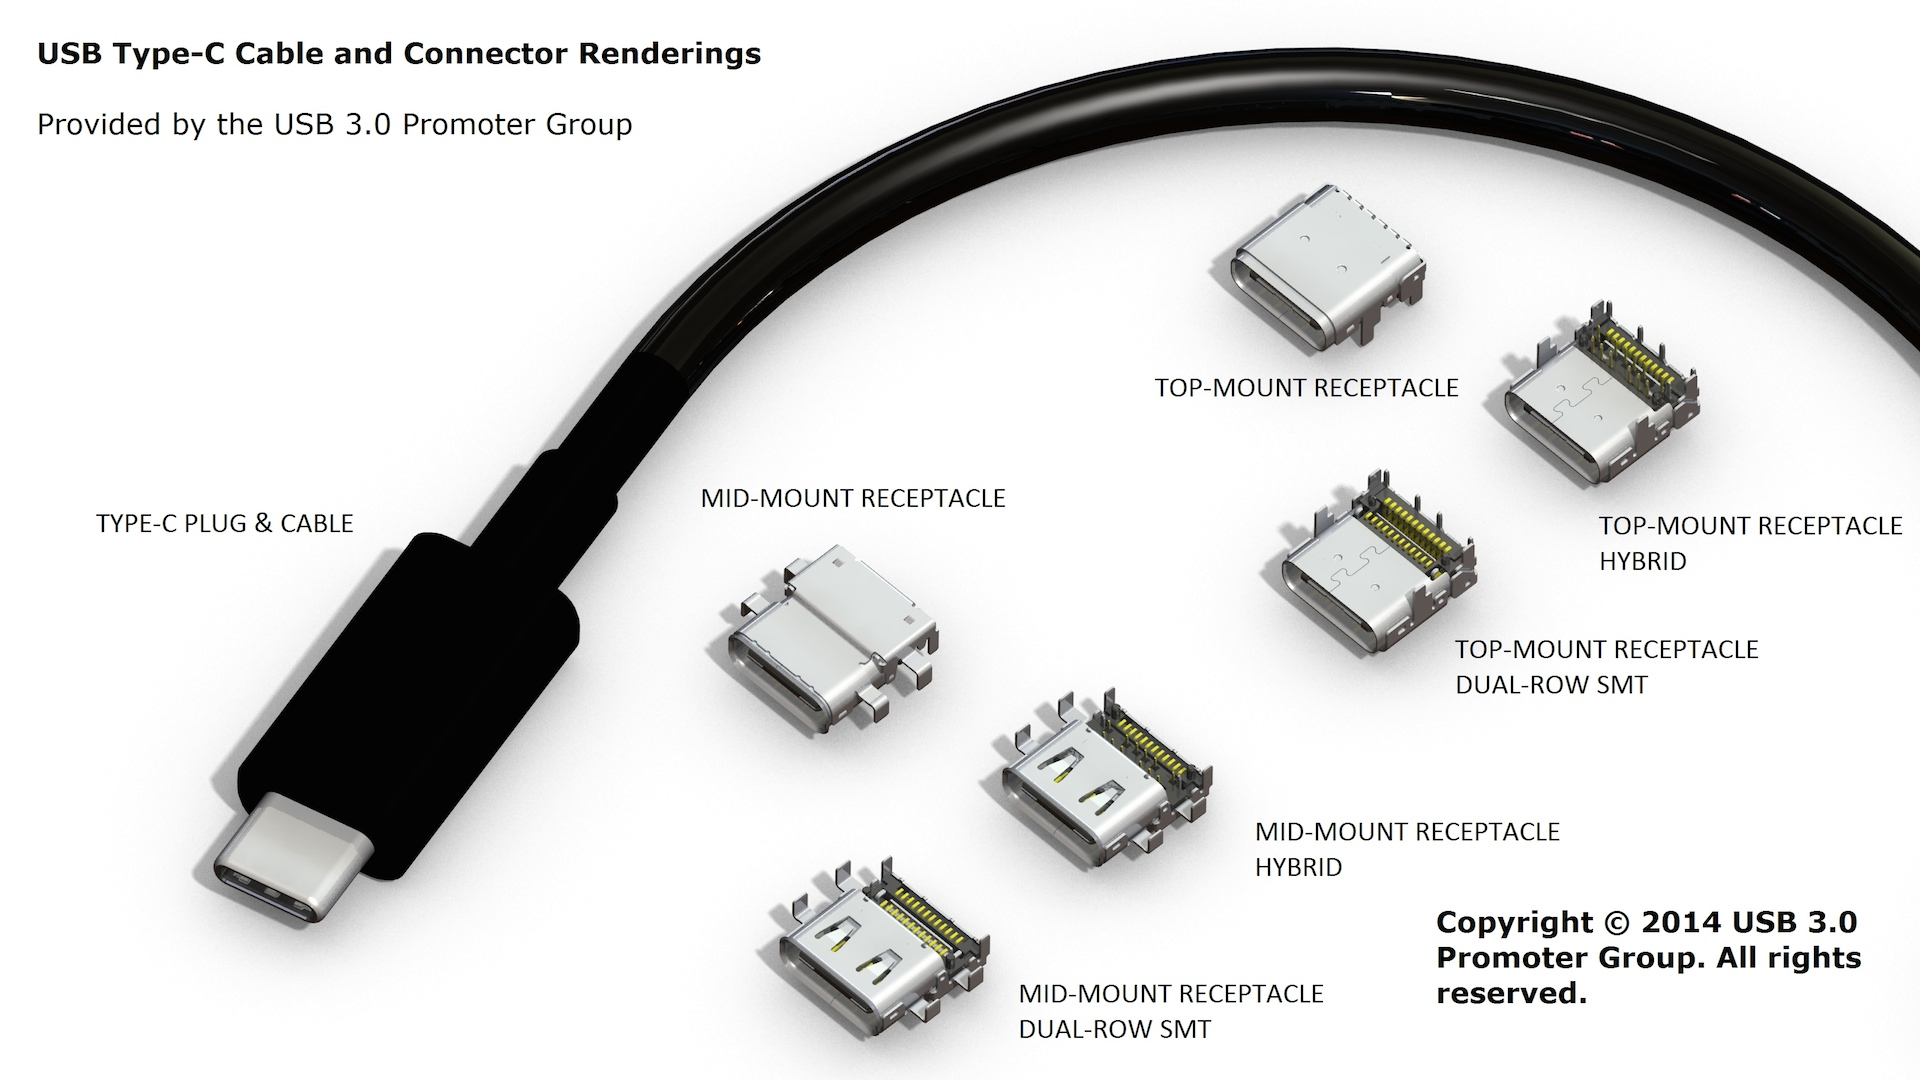 Tiny, reversible USB connector | Ars Technica